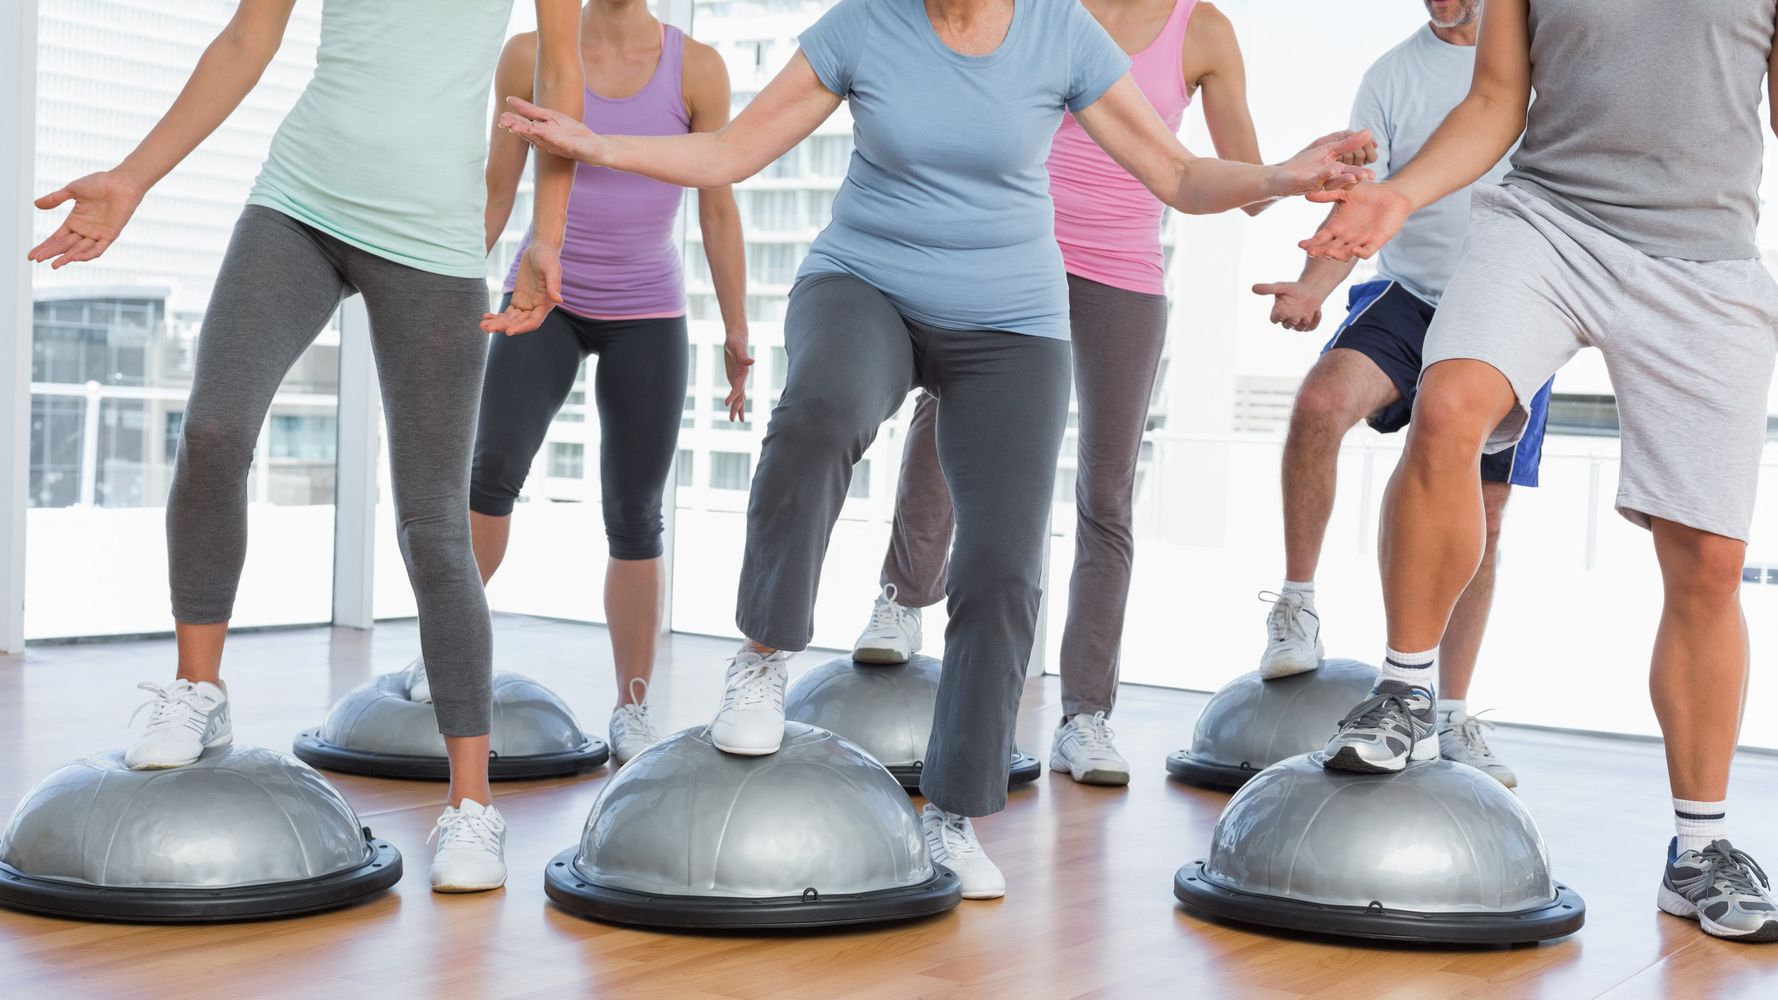 An Extra 10 Minutes Of Activity Daily Could Help You Live Longer Huffpost 7964